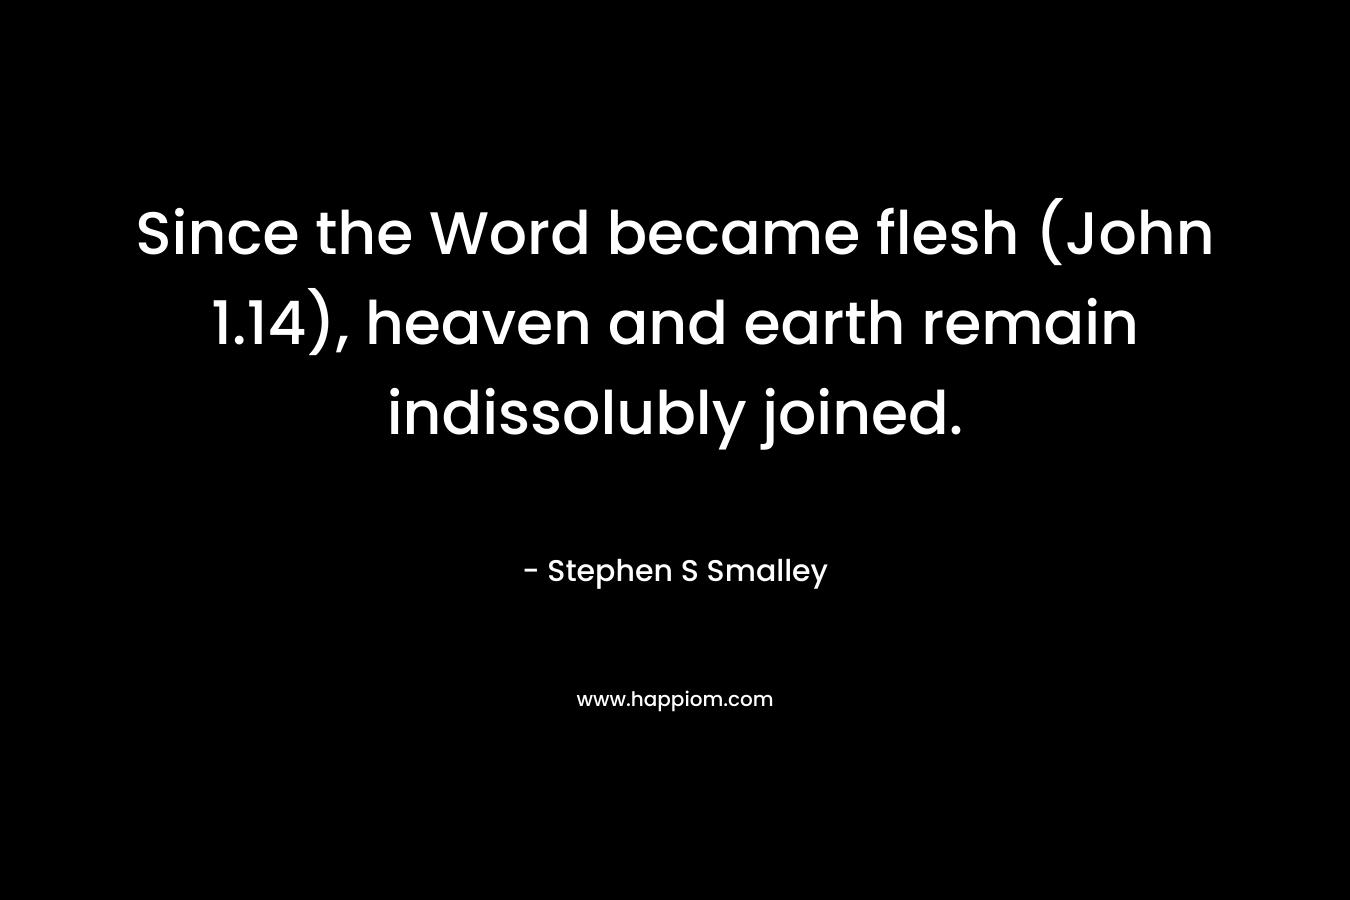 Since the Word became flesh (John 1.14), heaven and earth remain indissolubly joined. – Stephen S Smalley